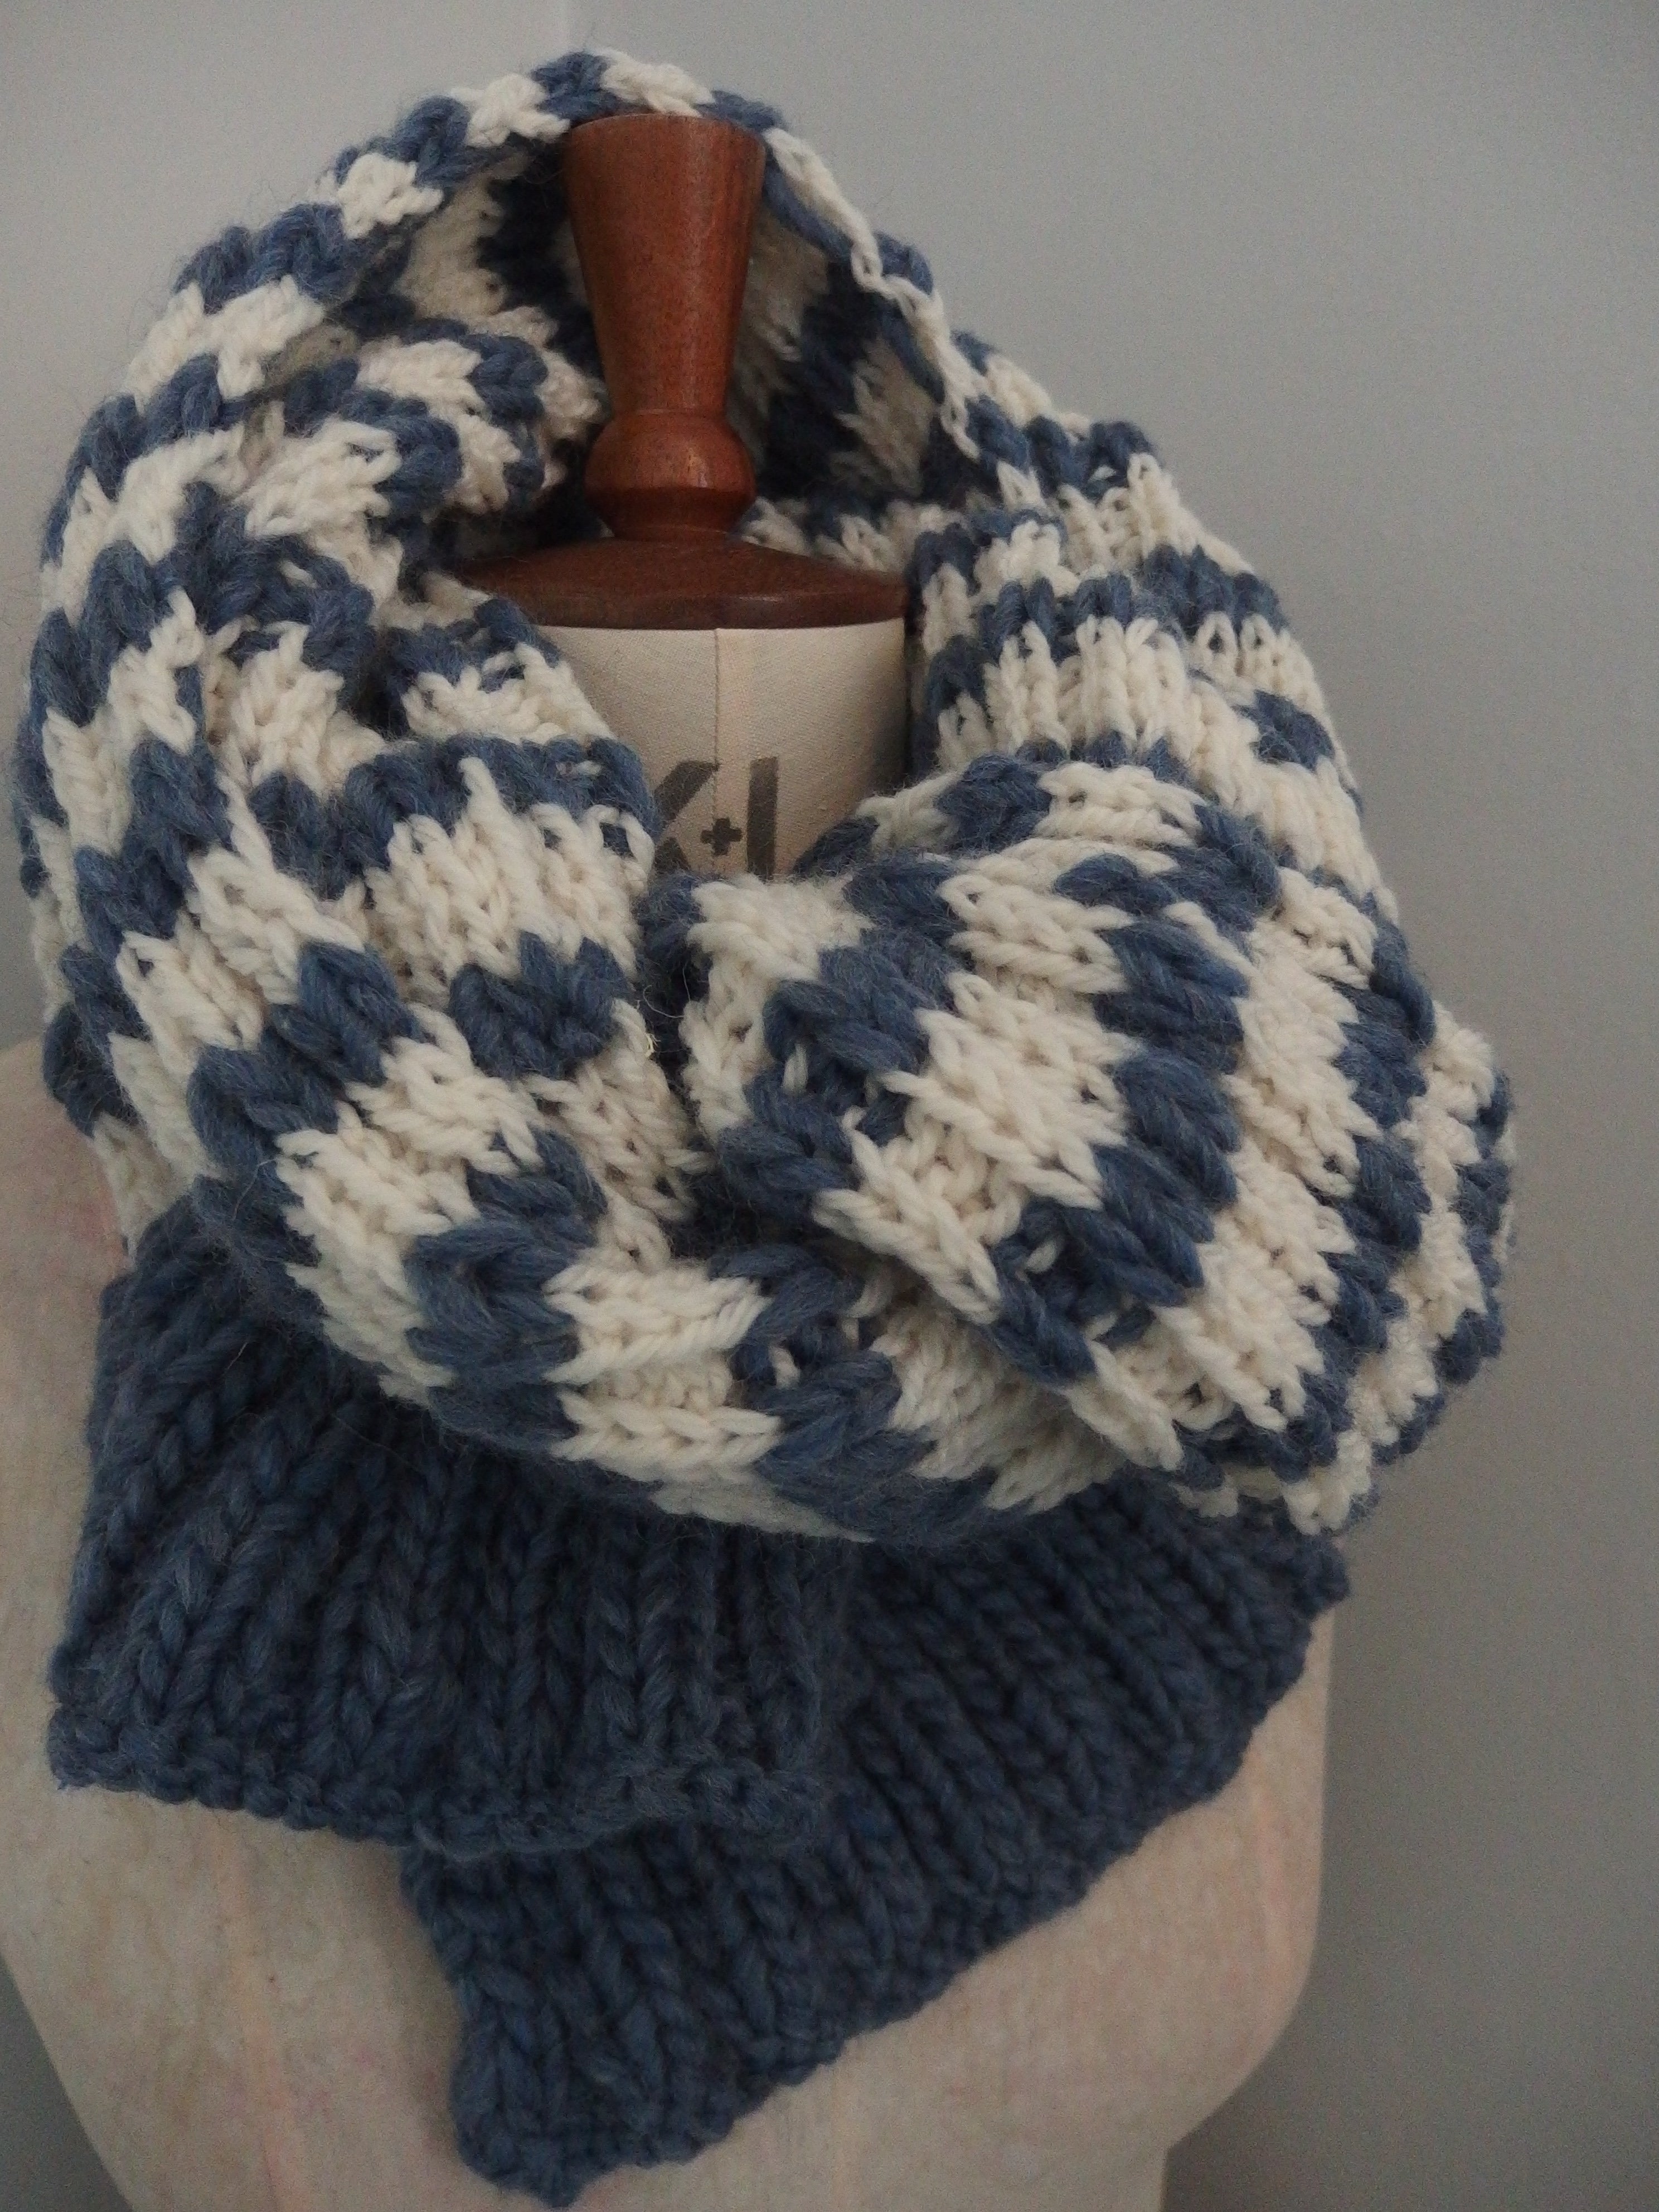 Big Scarf - Extraordinarily soft 100% wool - Petrol Blue and Off White